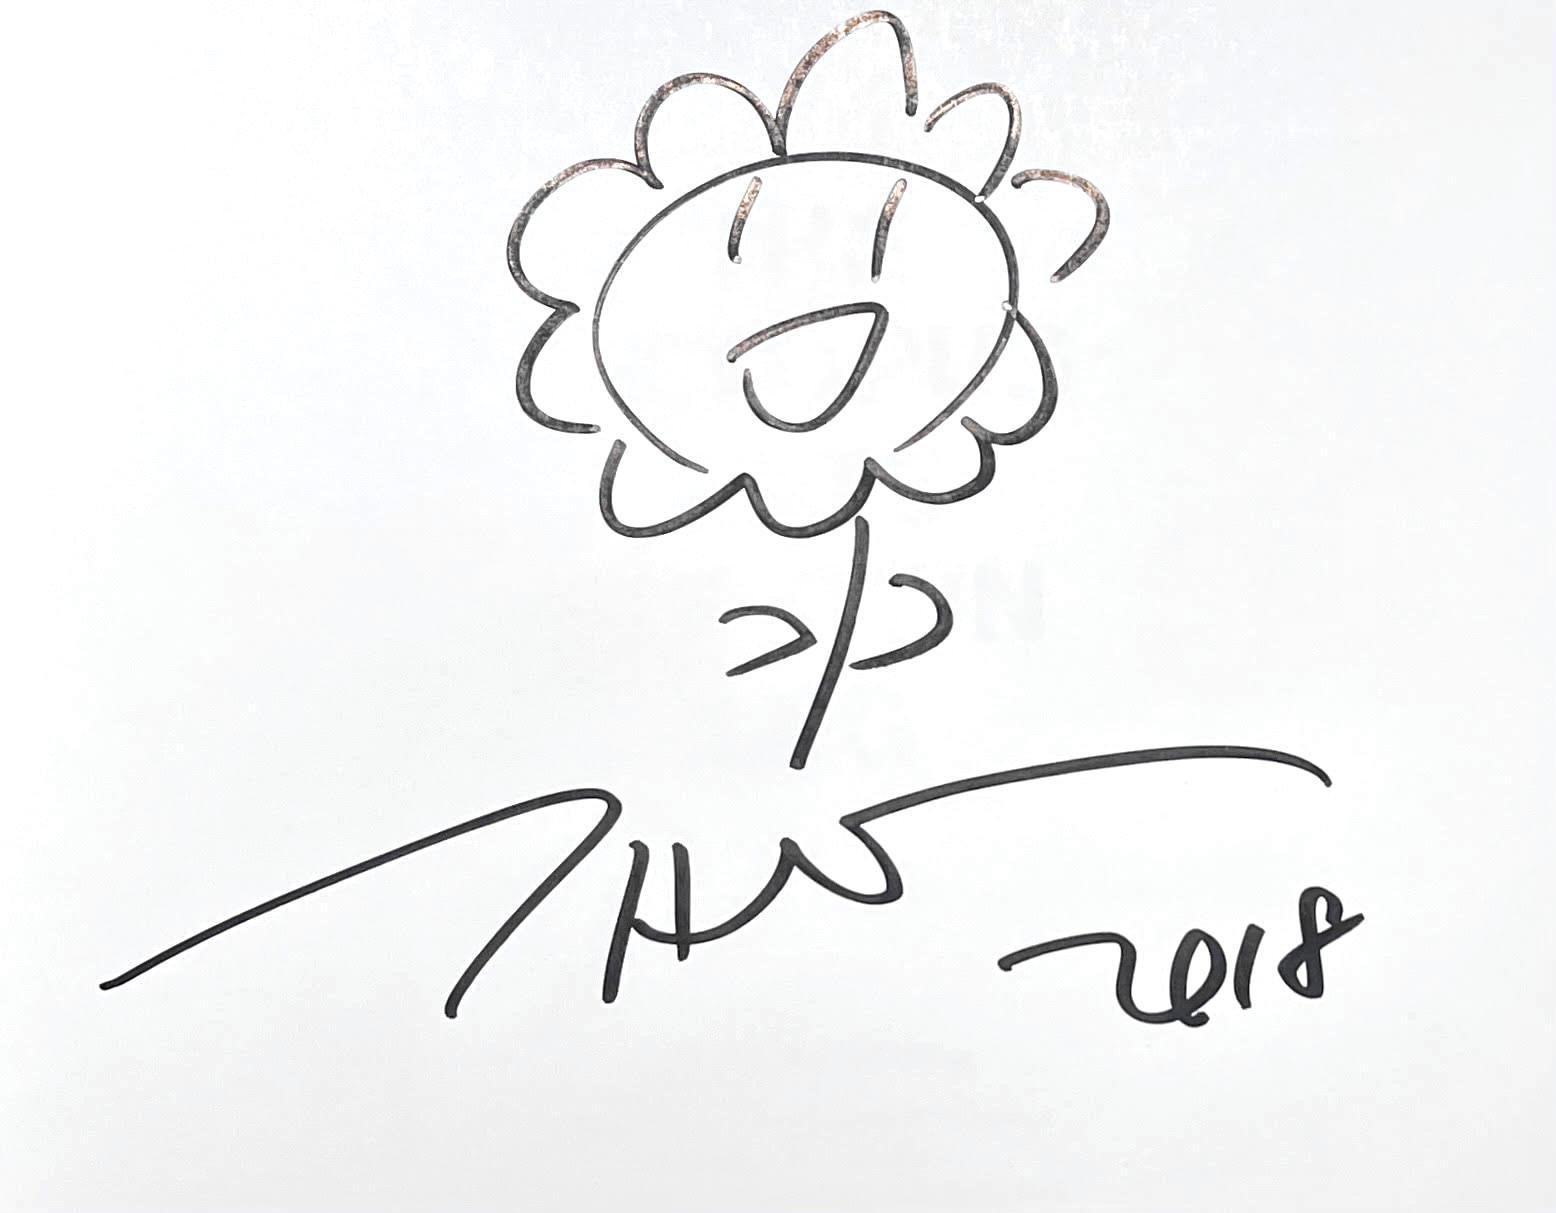 Takashi Murakami
Unique flower drawing, created for the Modern Art Museum, Ft. Worth, Texas, 2018
Original drawing done in marker, bound in monograph title page
Signed by Murakami directly underneath the drawing
11 × 9 1/2 inches
This original hand